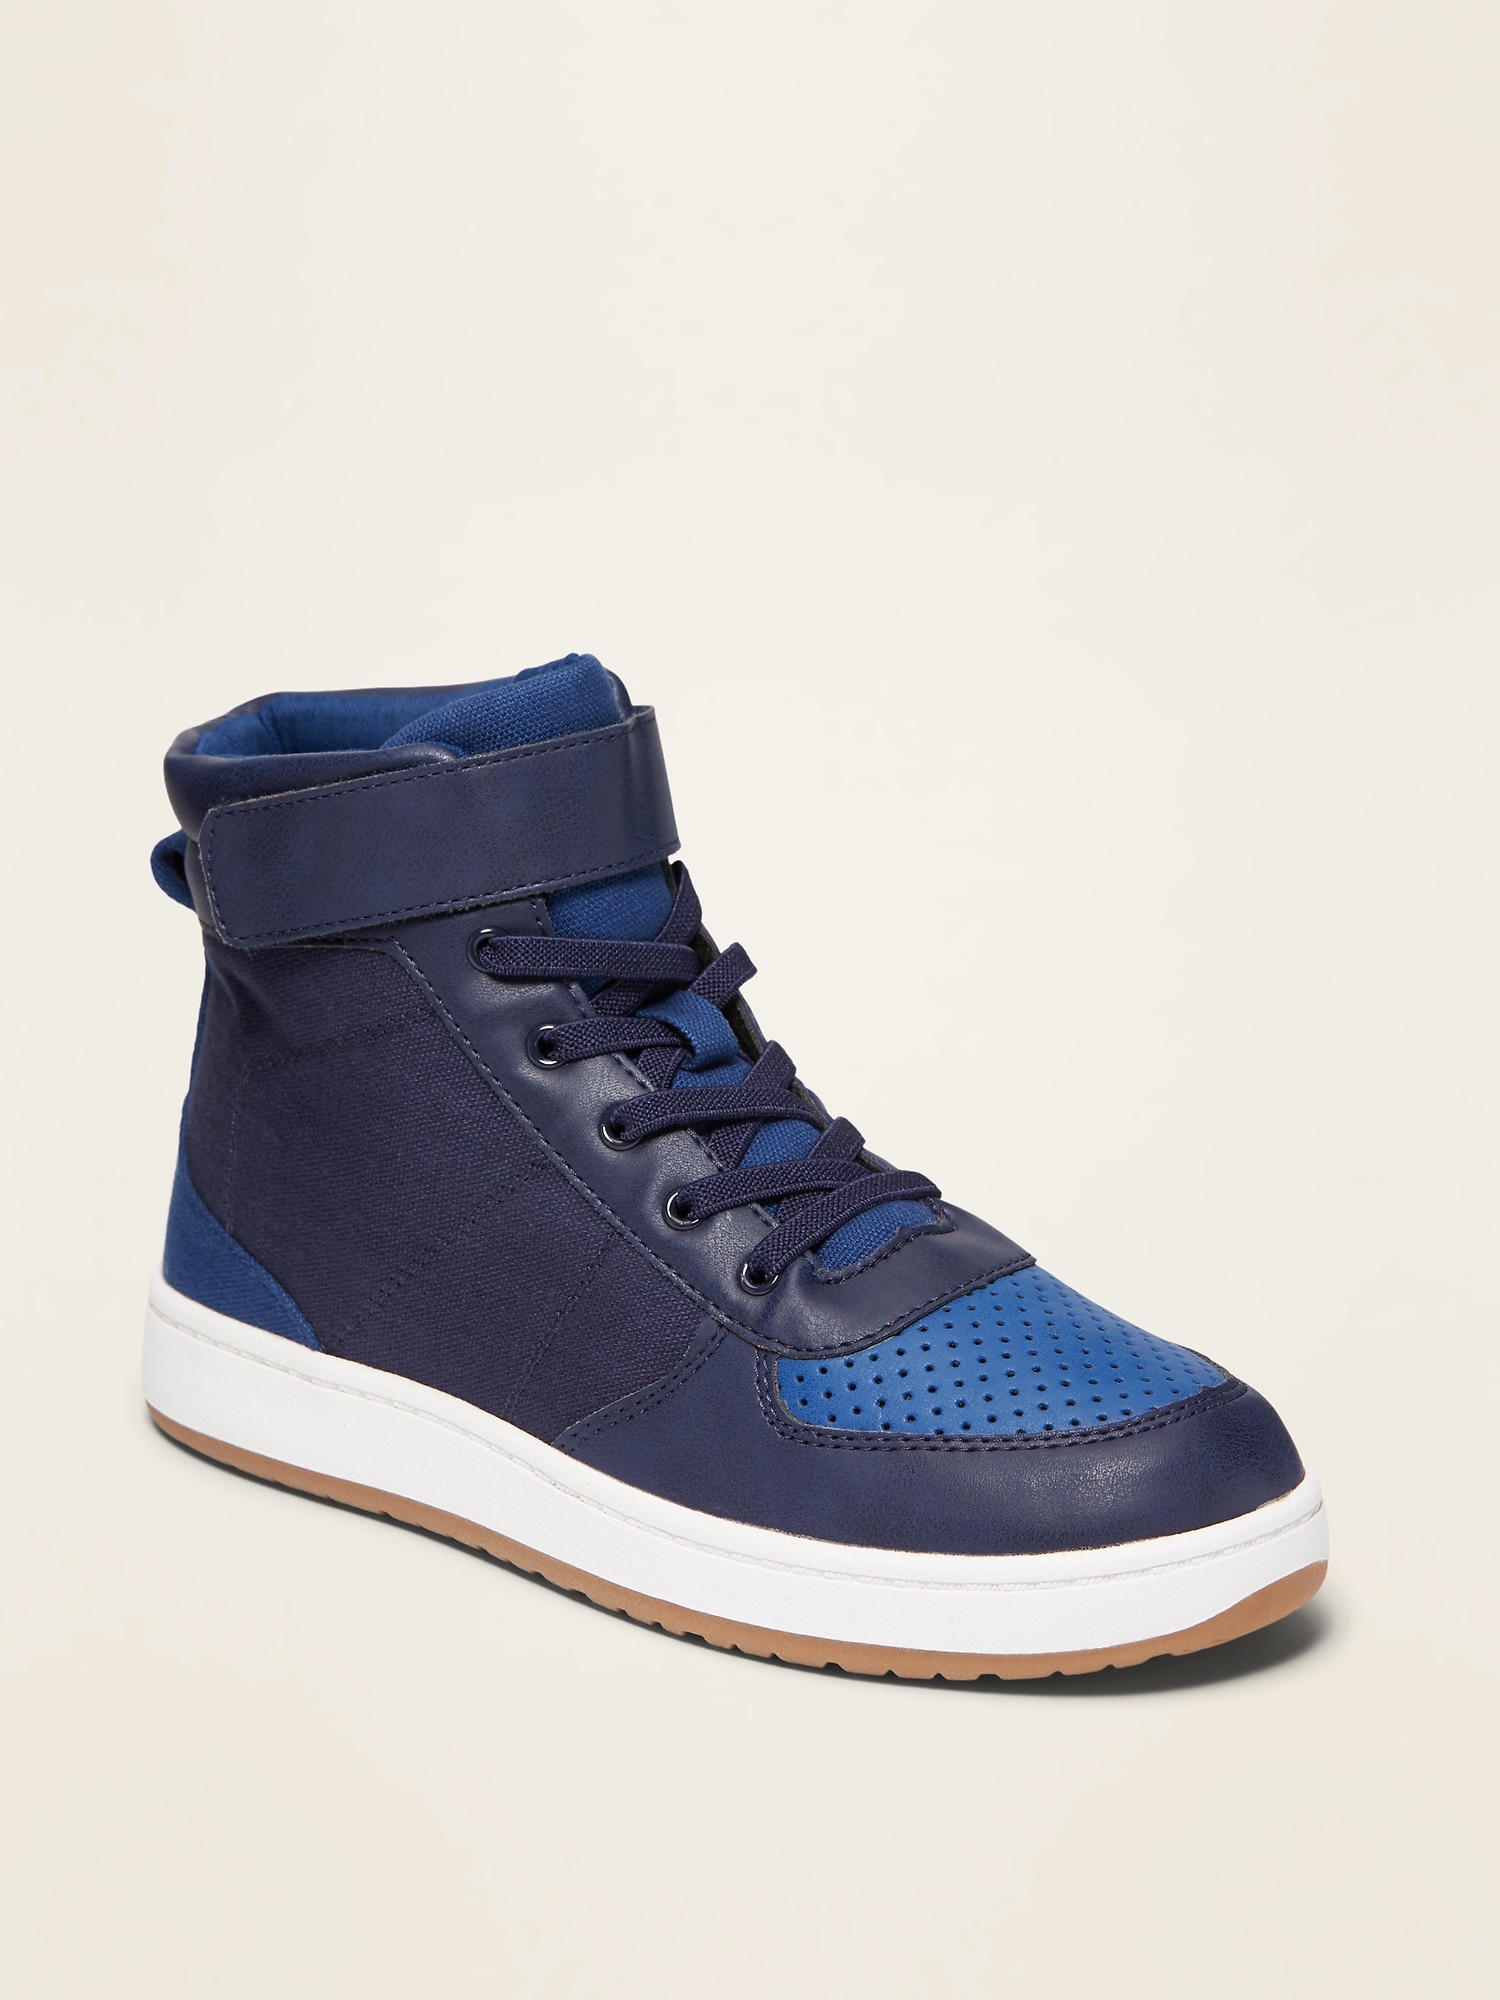 Old Navy gender-neutral Canvas High-Top Sneakers - - Size 12